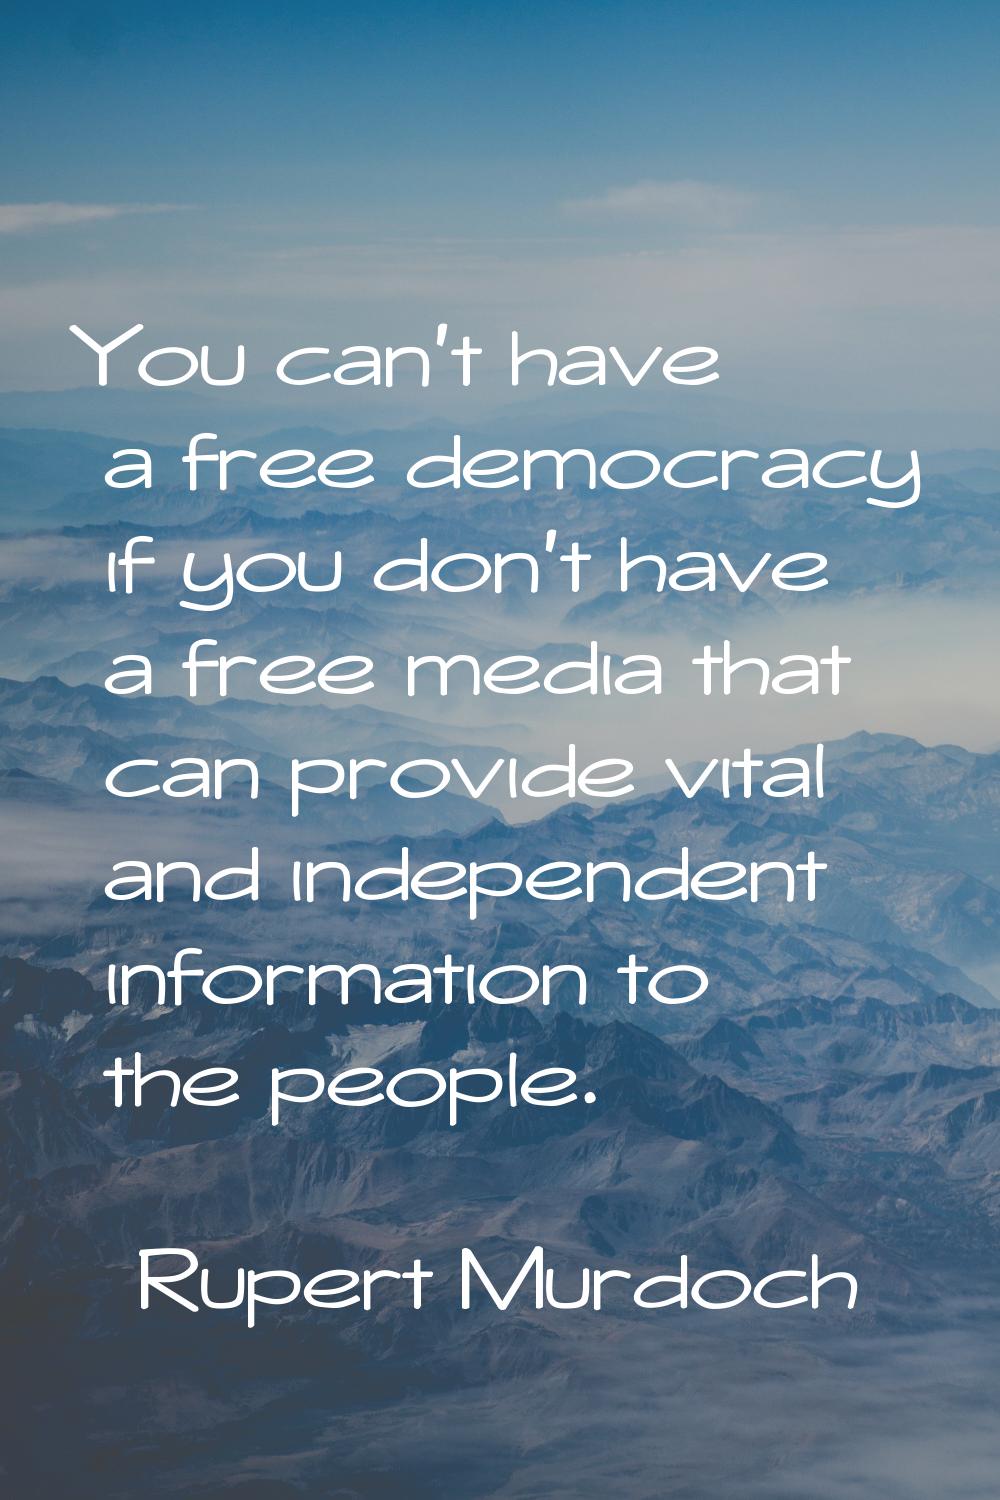 You can't have a free democracy if you don't have a free media that can provide vital and independe